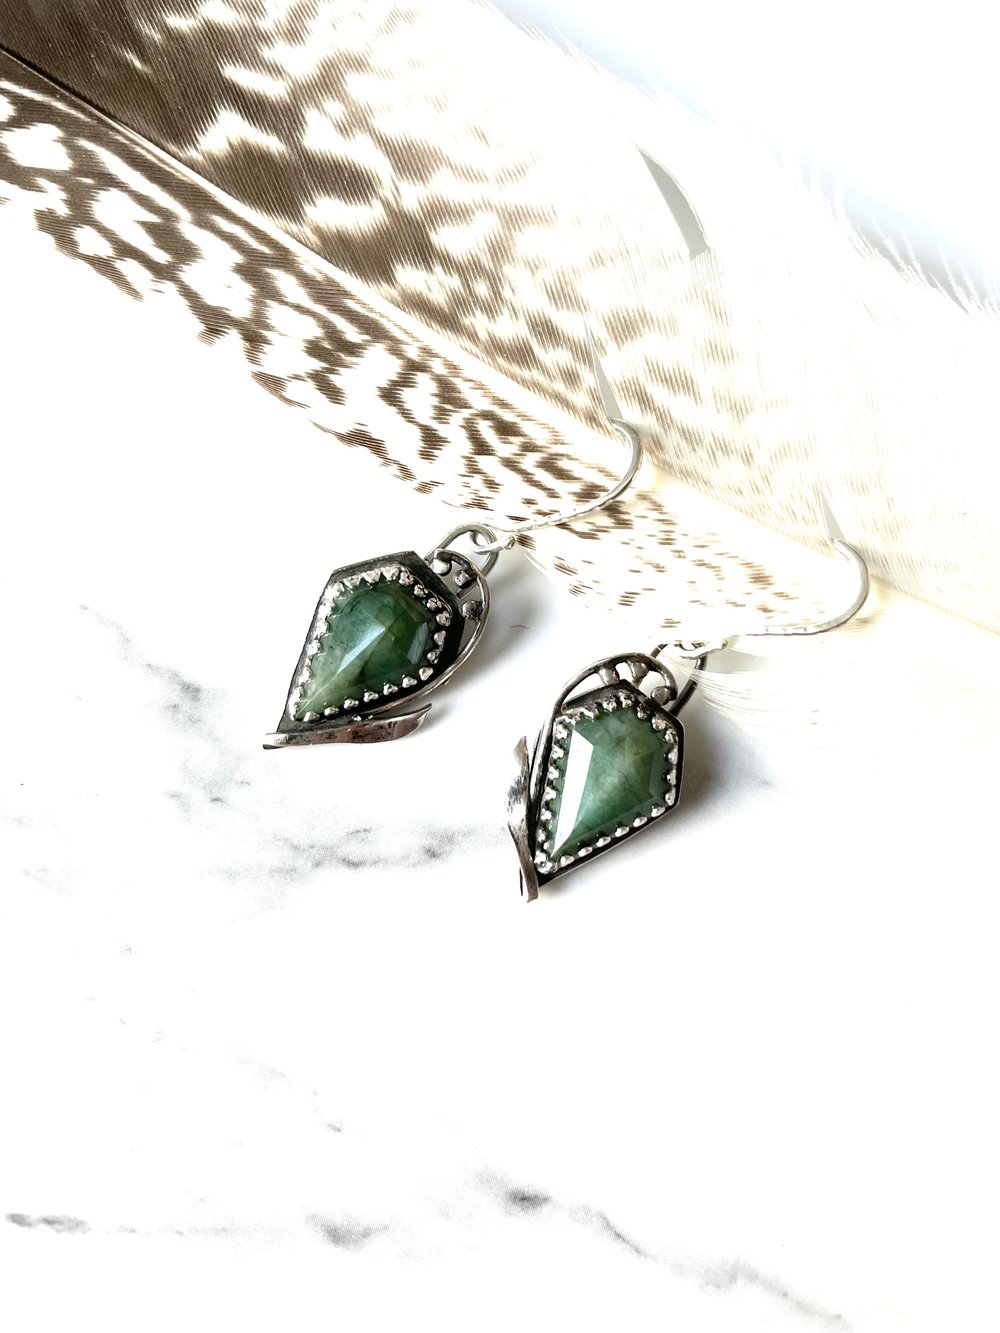 Handmade Sterling Silver Emerald May Birth Stone Earrings Lily Of The Valley 925